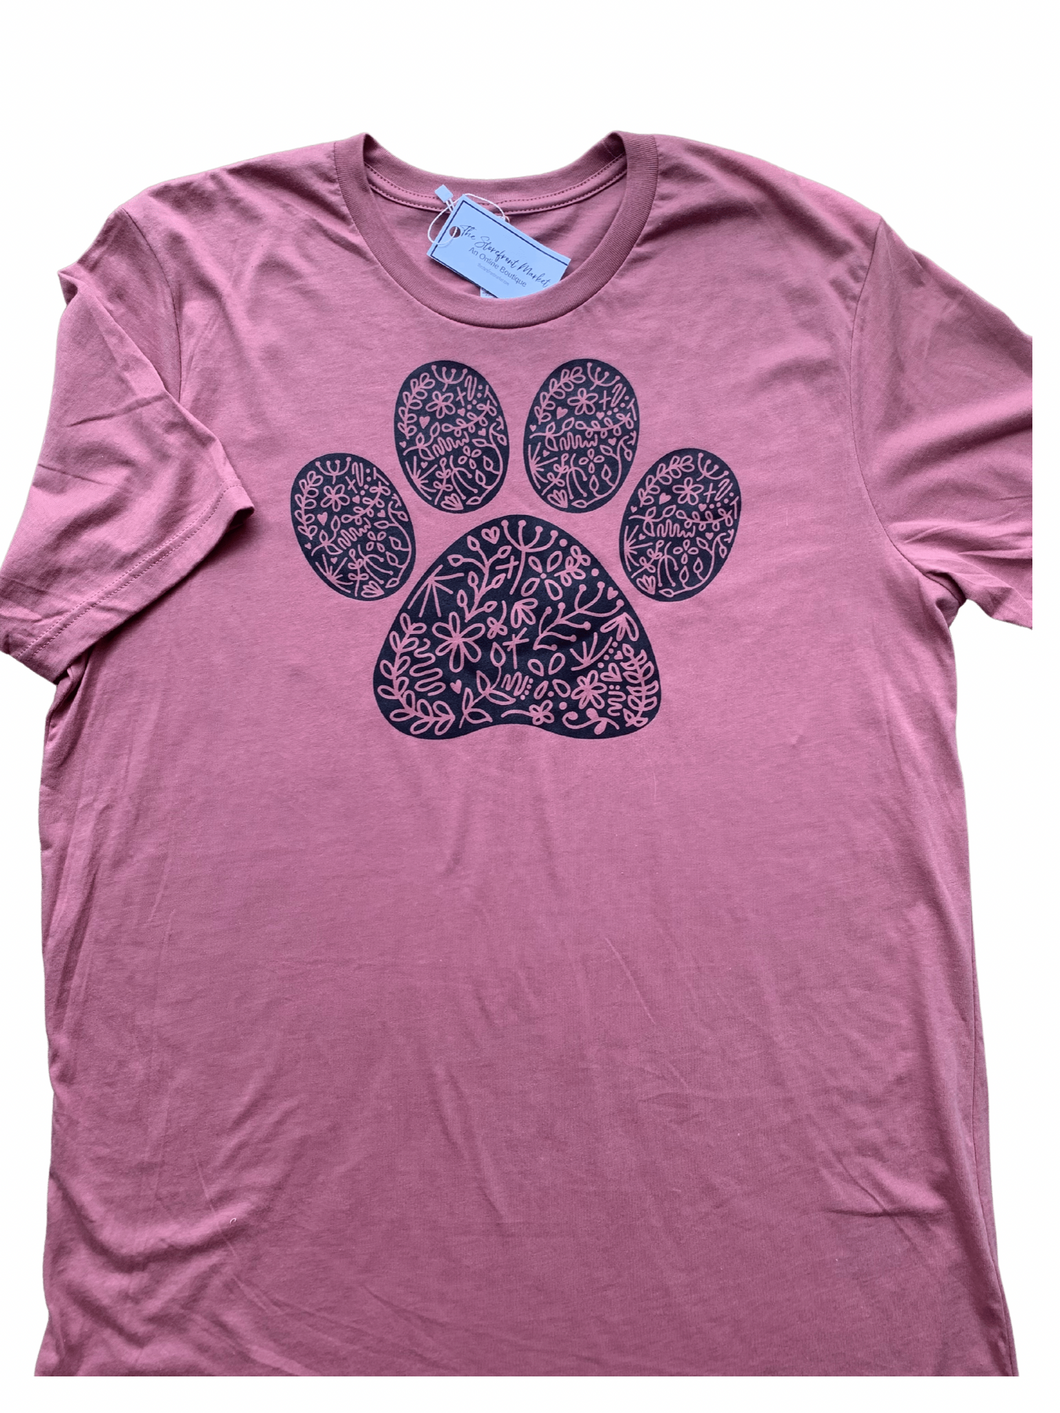 Floral Paw Print Graphic Tee